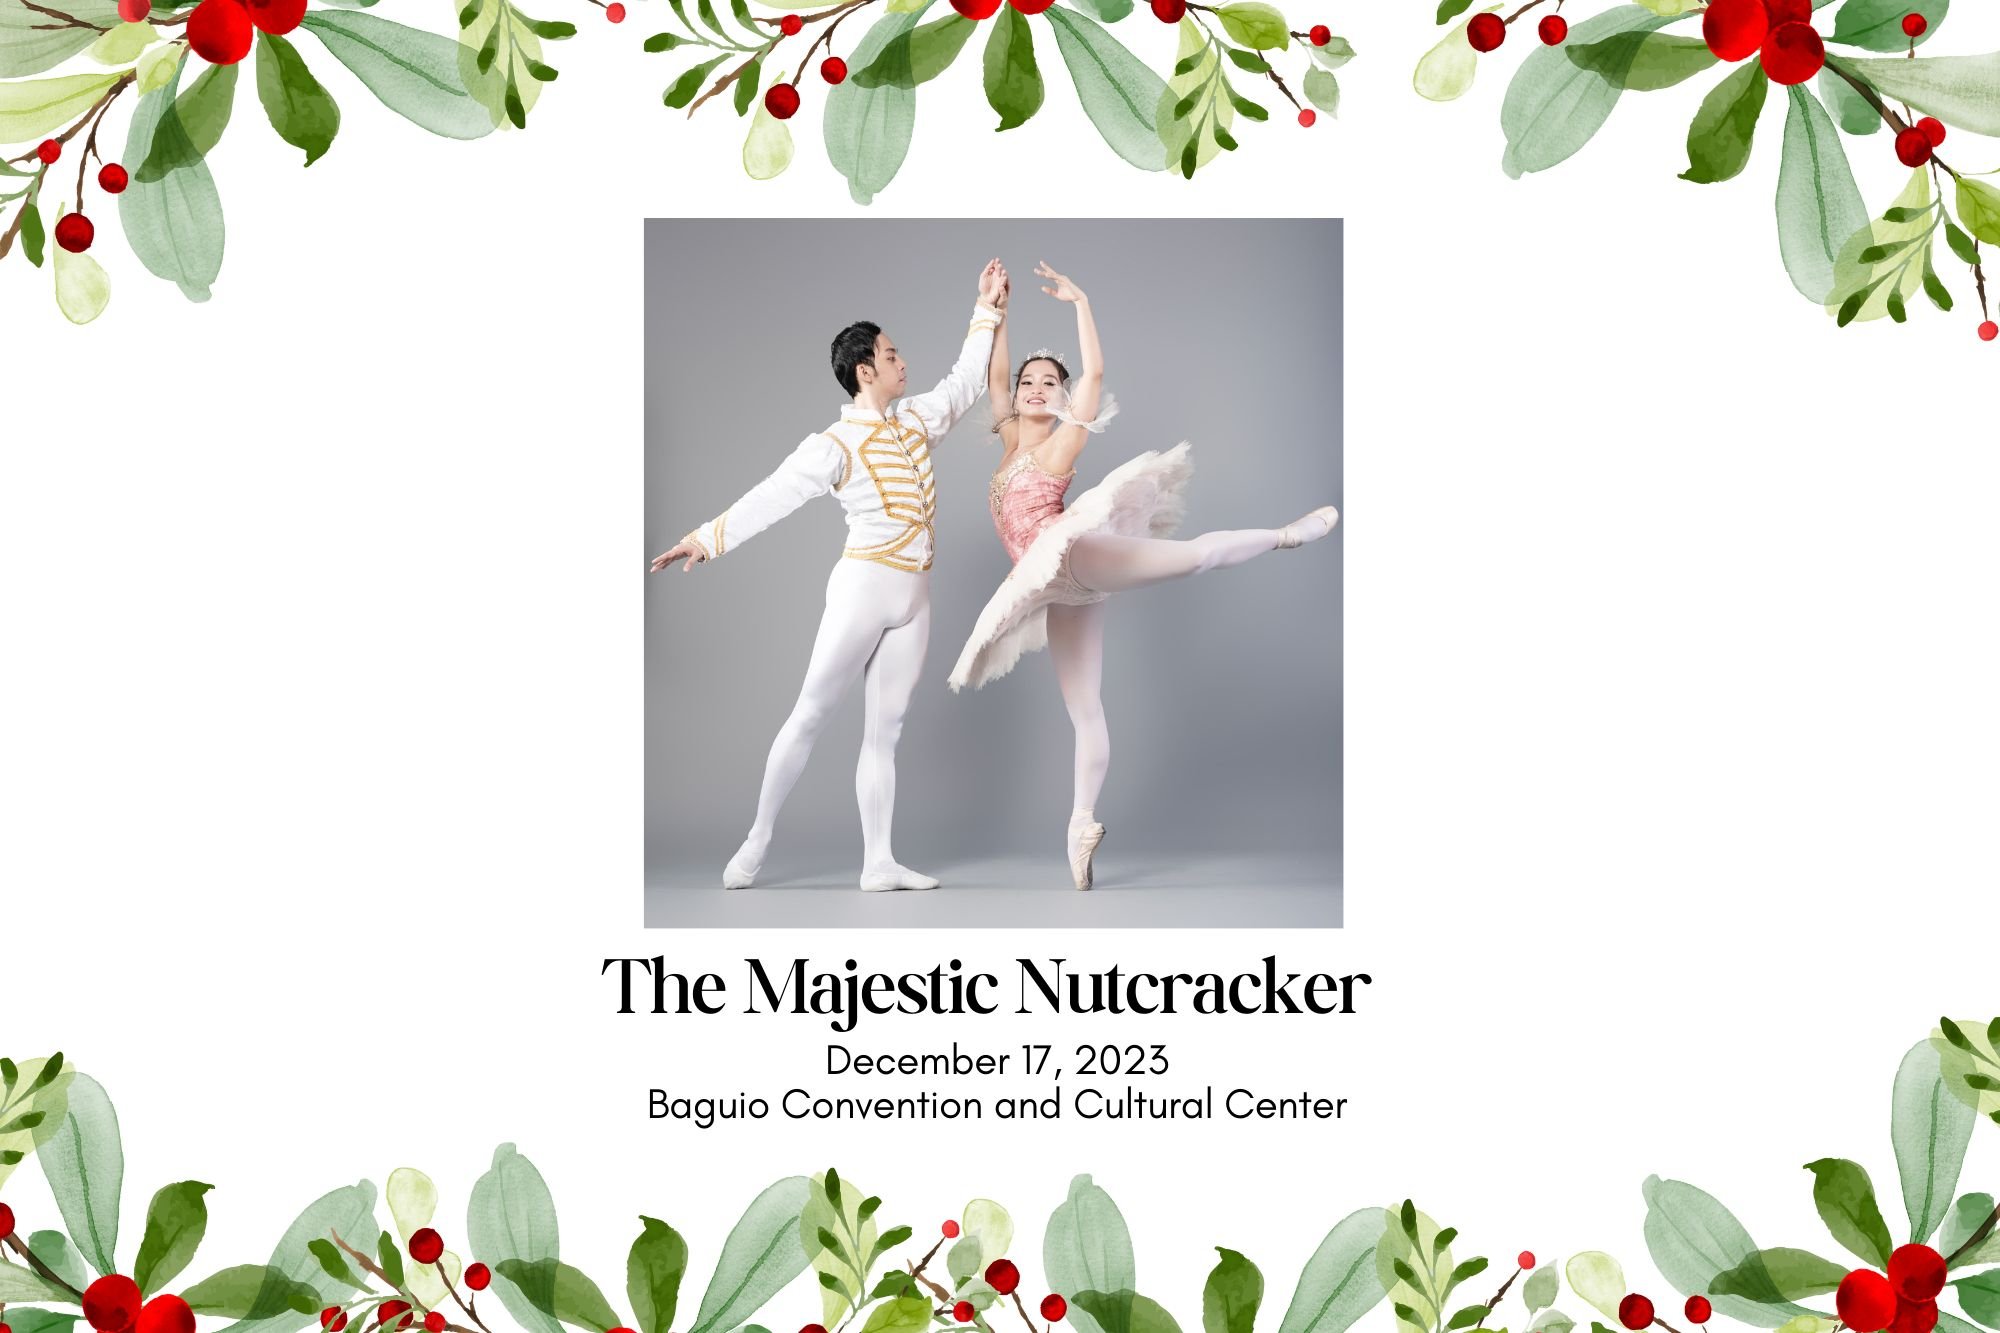    The digibook of Ballet Baguio’s Christmas production features a photo of Ballet Manila’s Sean Pelegrin and Jessica Pearl Dames in their guest lead roles as The Prince and the Sugar Plum Fairy.   